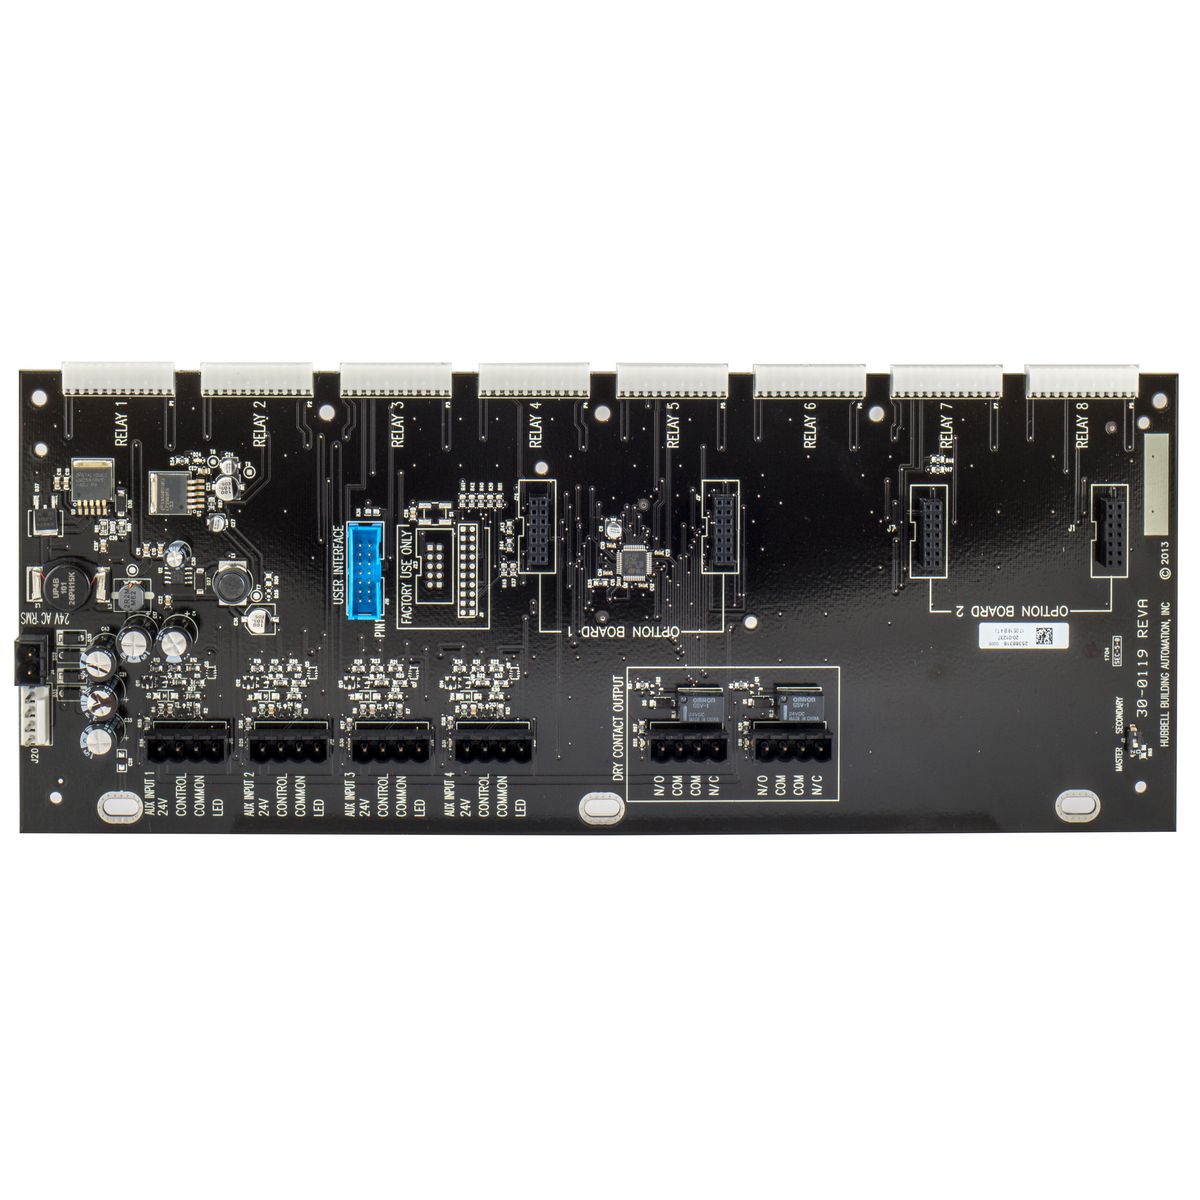 RPLCMT MOTHERBOARD FOR 8 RLY PANEL